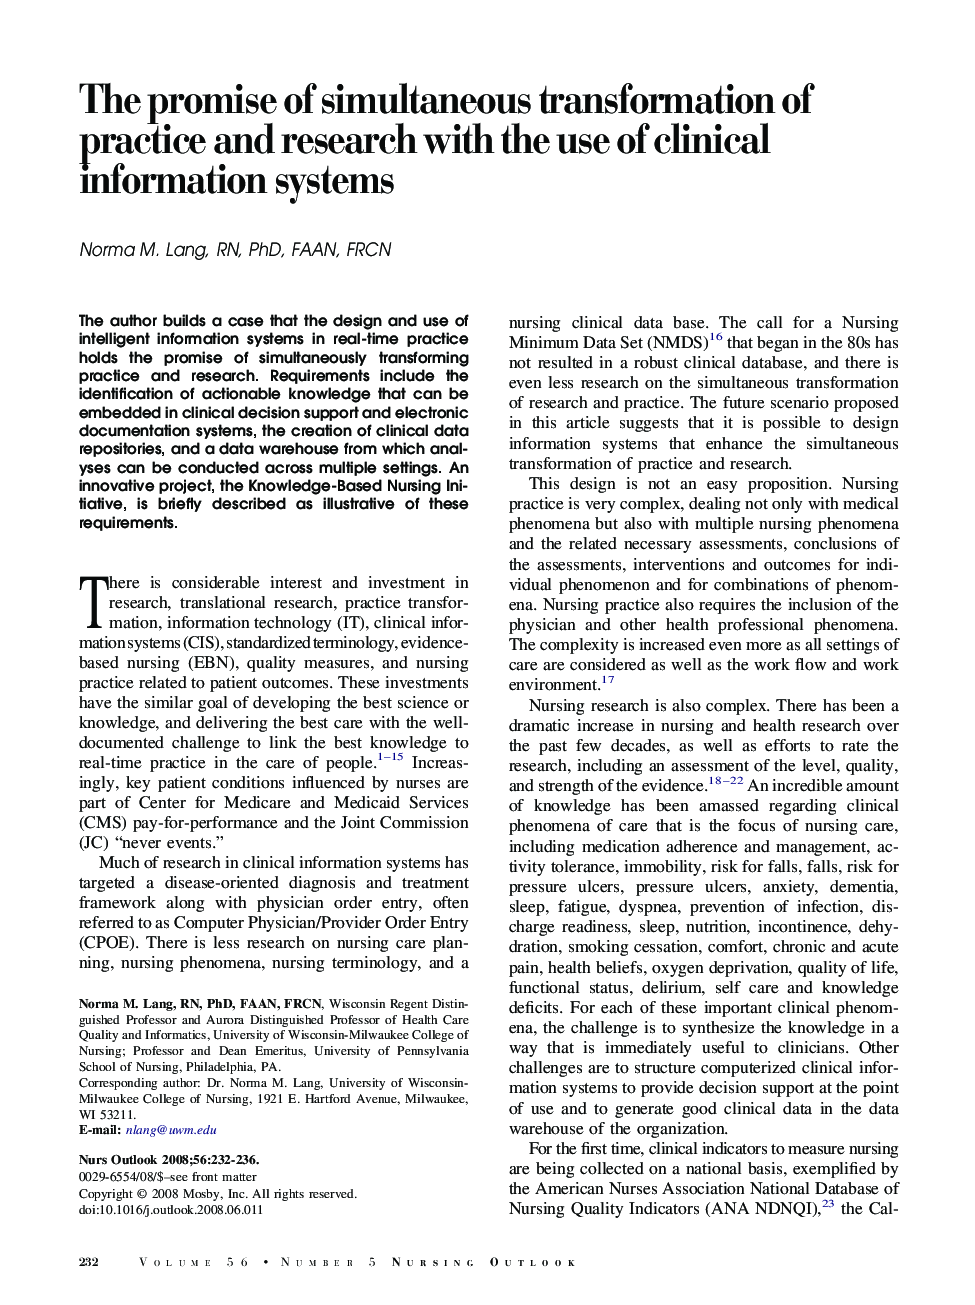 The promise of simultaneous transformation of practice and research with the use of clinical information systems